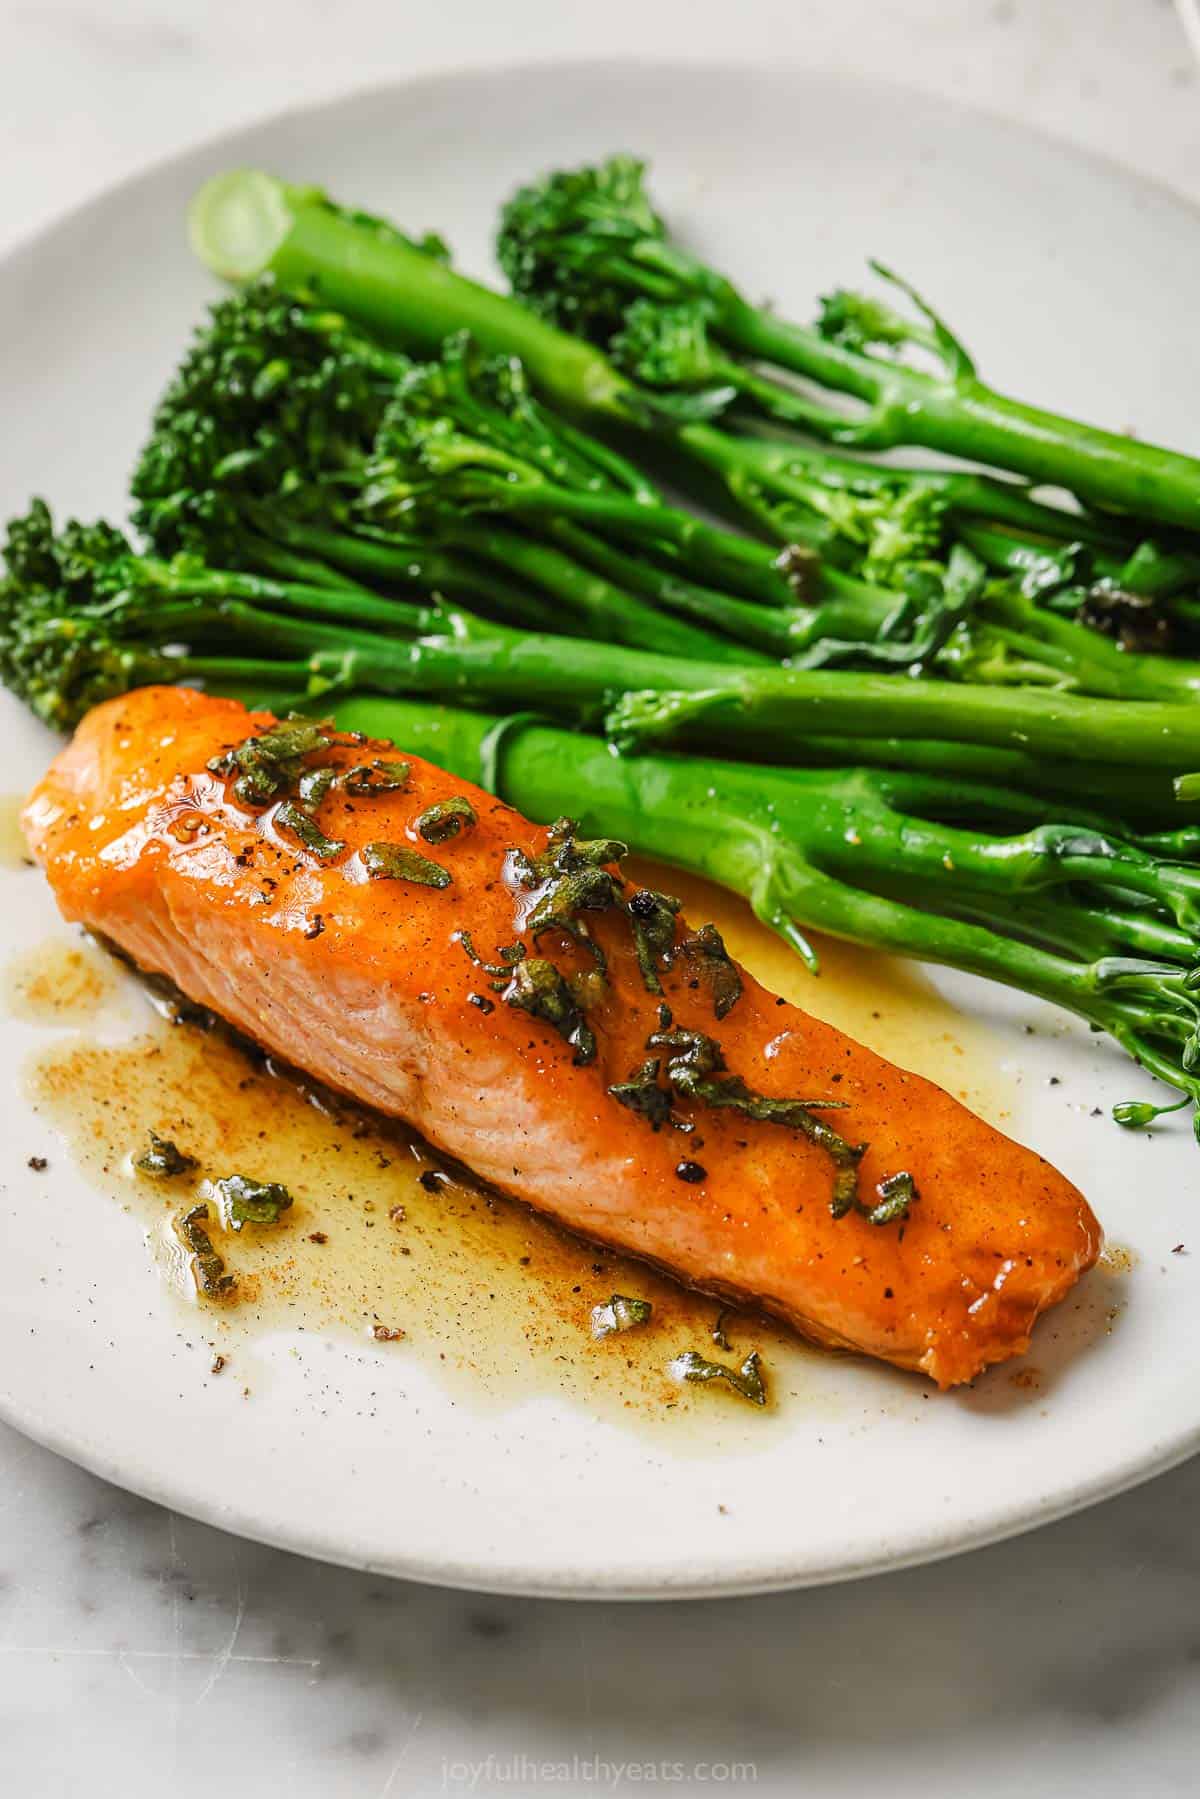 Pan seared salmon recipe with brown ،er sauce and broccolini on the side.